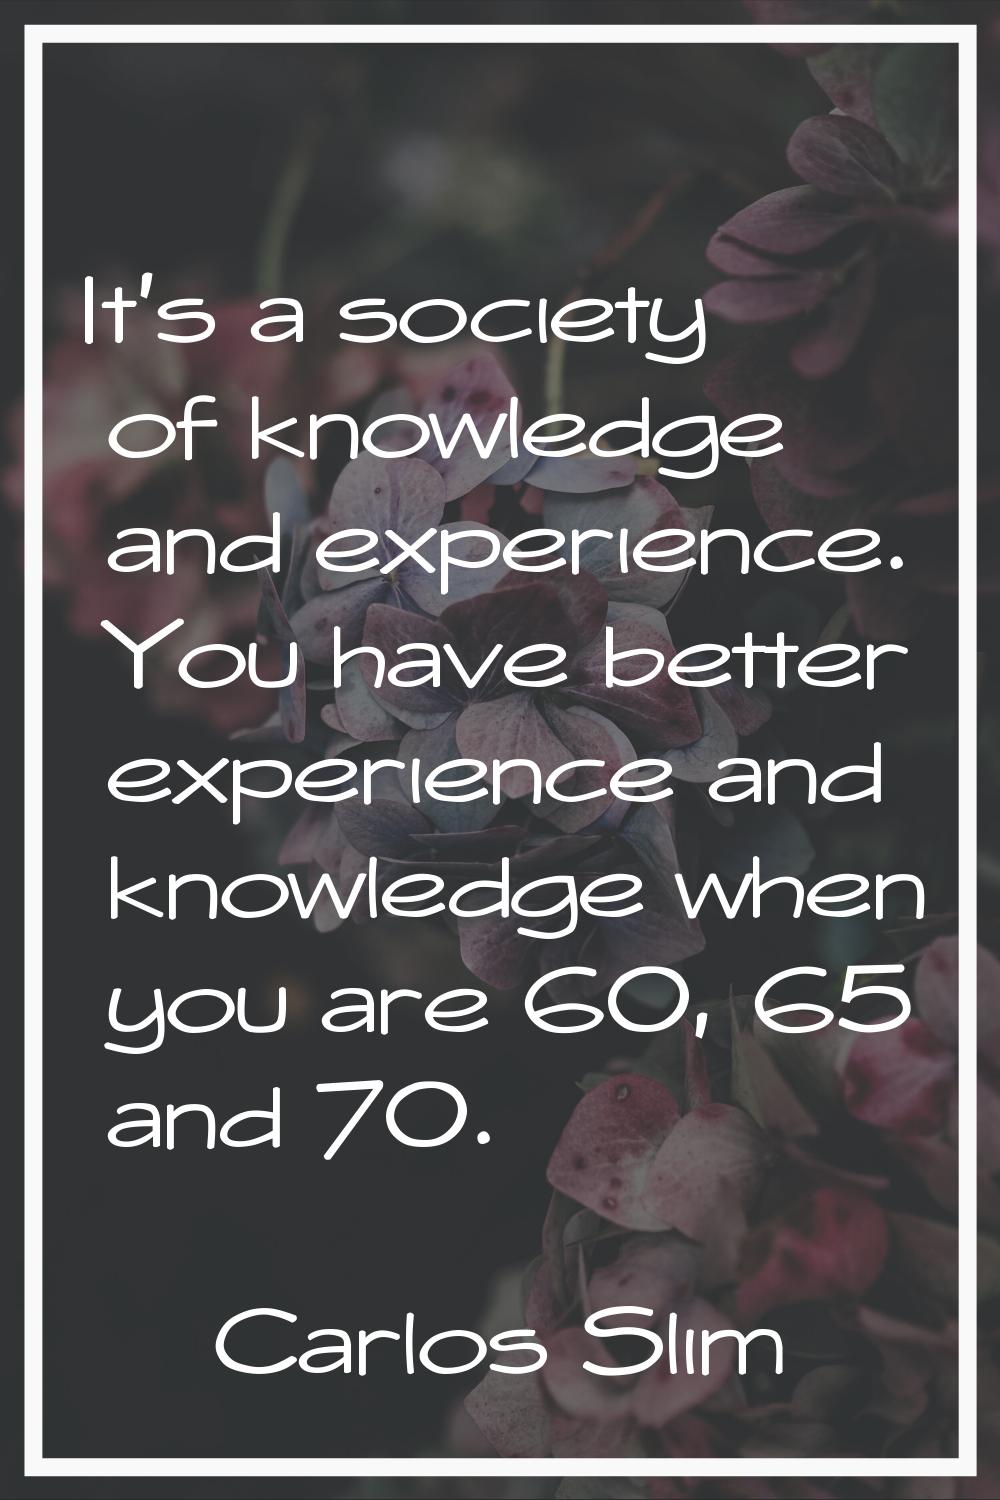 It's a society of knowledge and experience. You have better experience and knowledge when you are 6